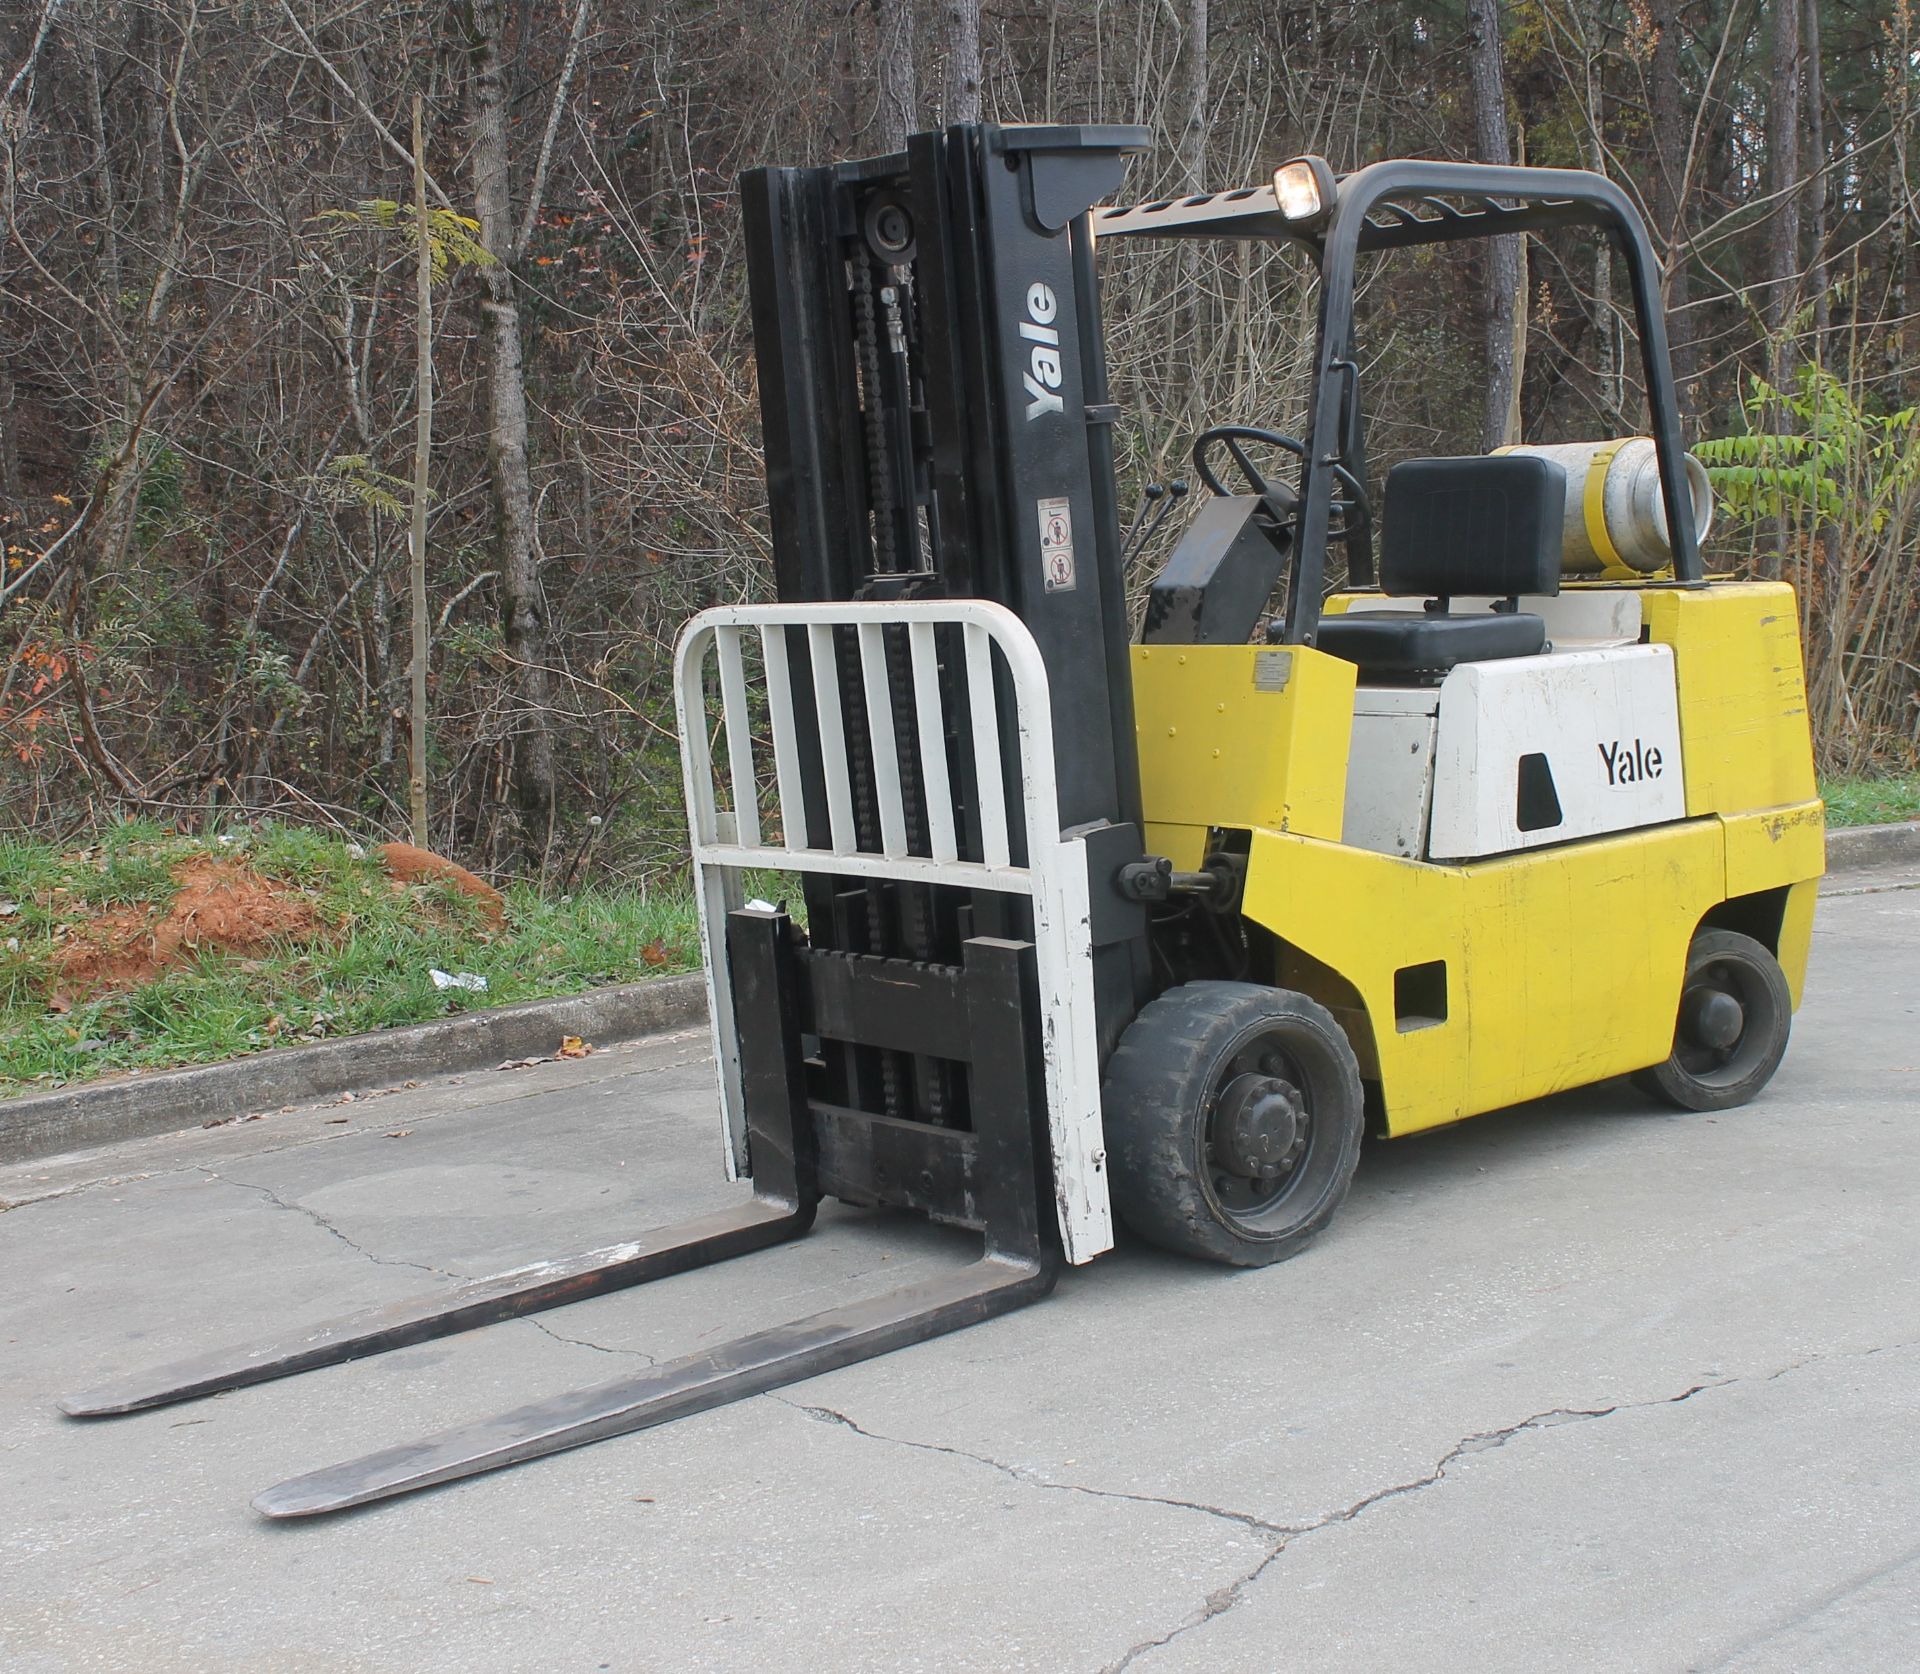 8000 LBS. CAPACITY YALE PROPANE FORKLIFT, CLICK HERE FOR VIDEO - Image 6 of 6